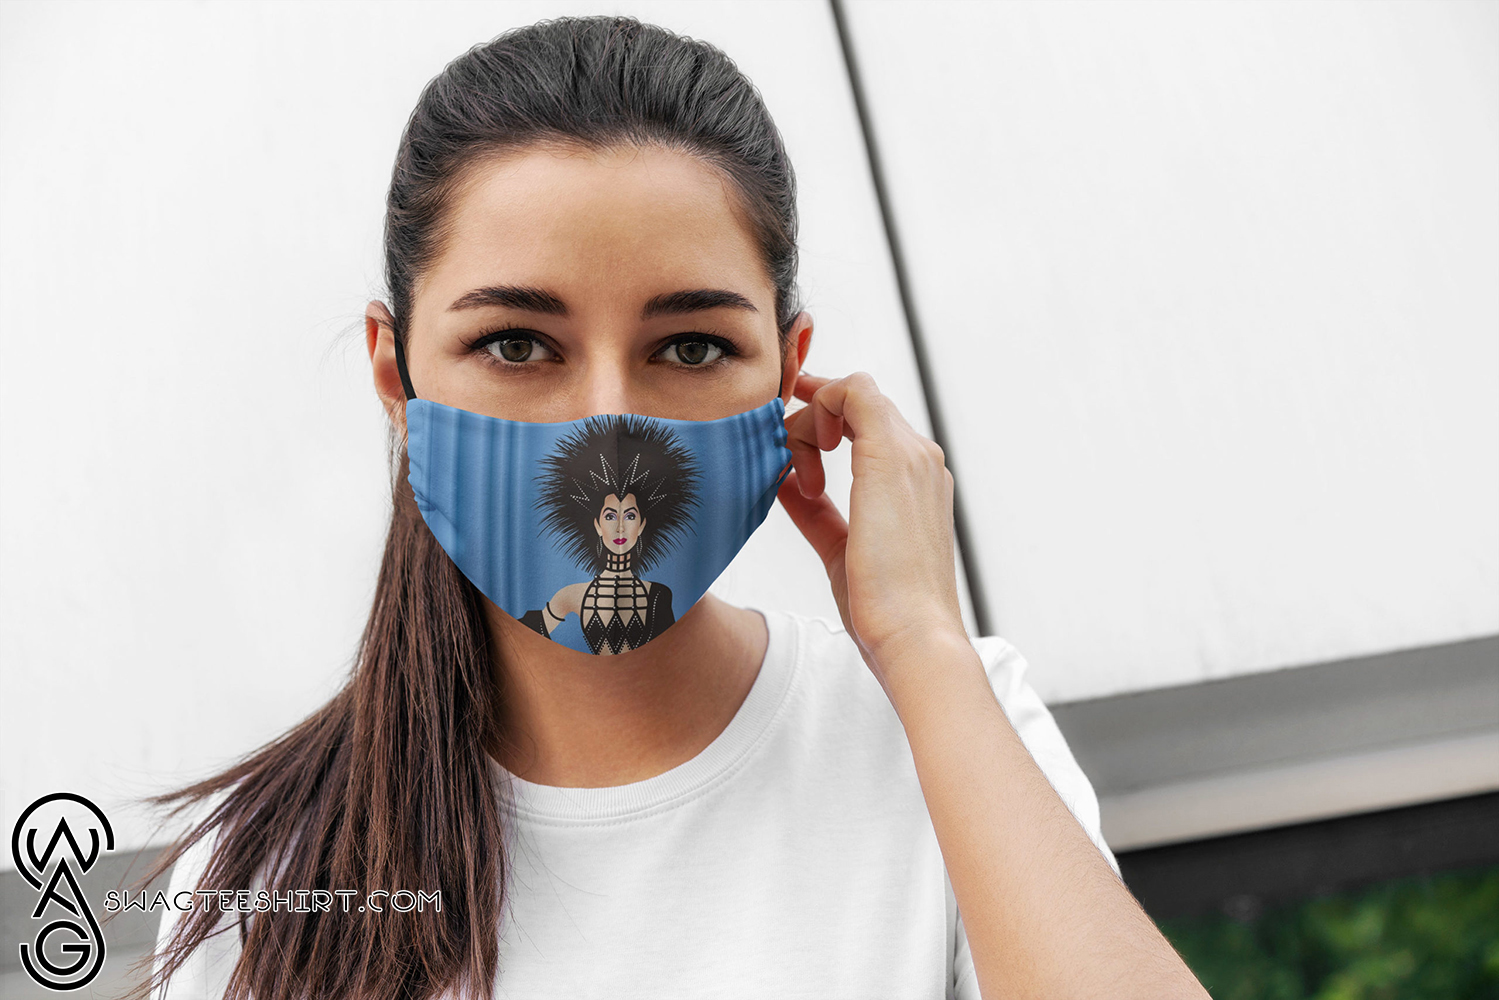 [special edition] Cherilyn sarkisian cher all over printed face mask – maria